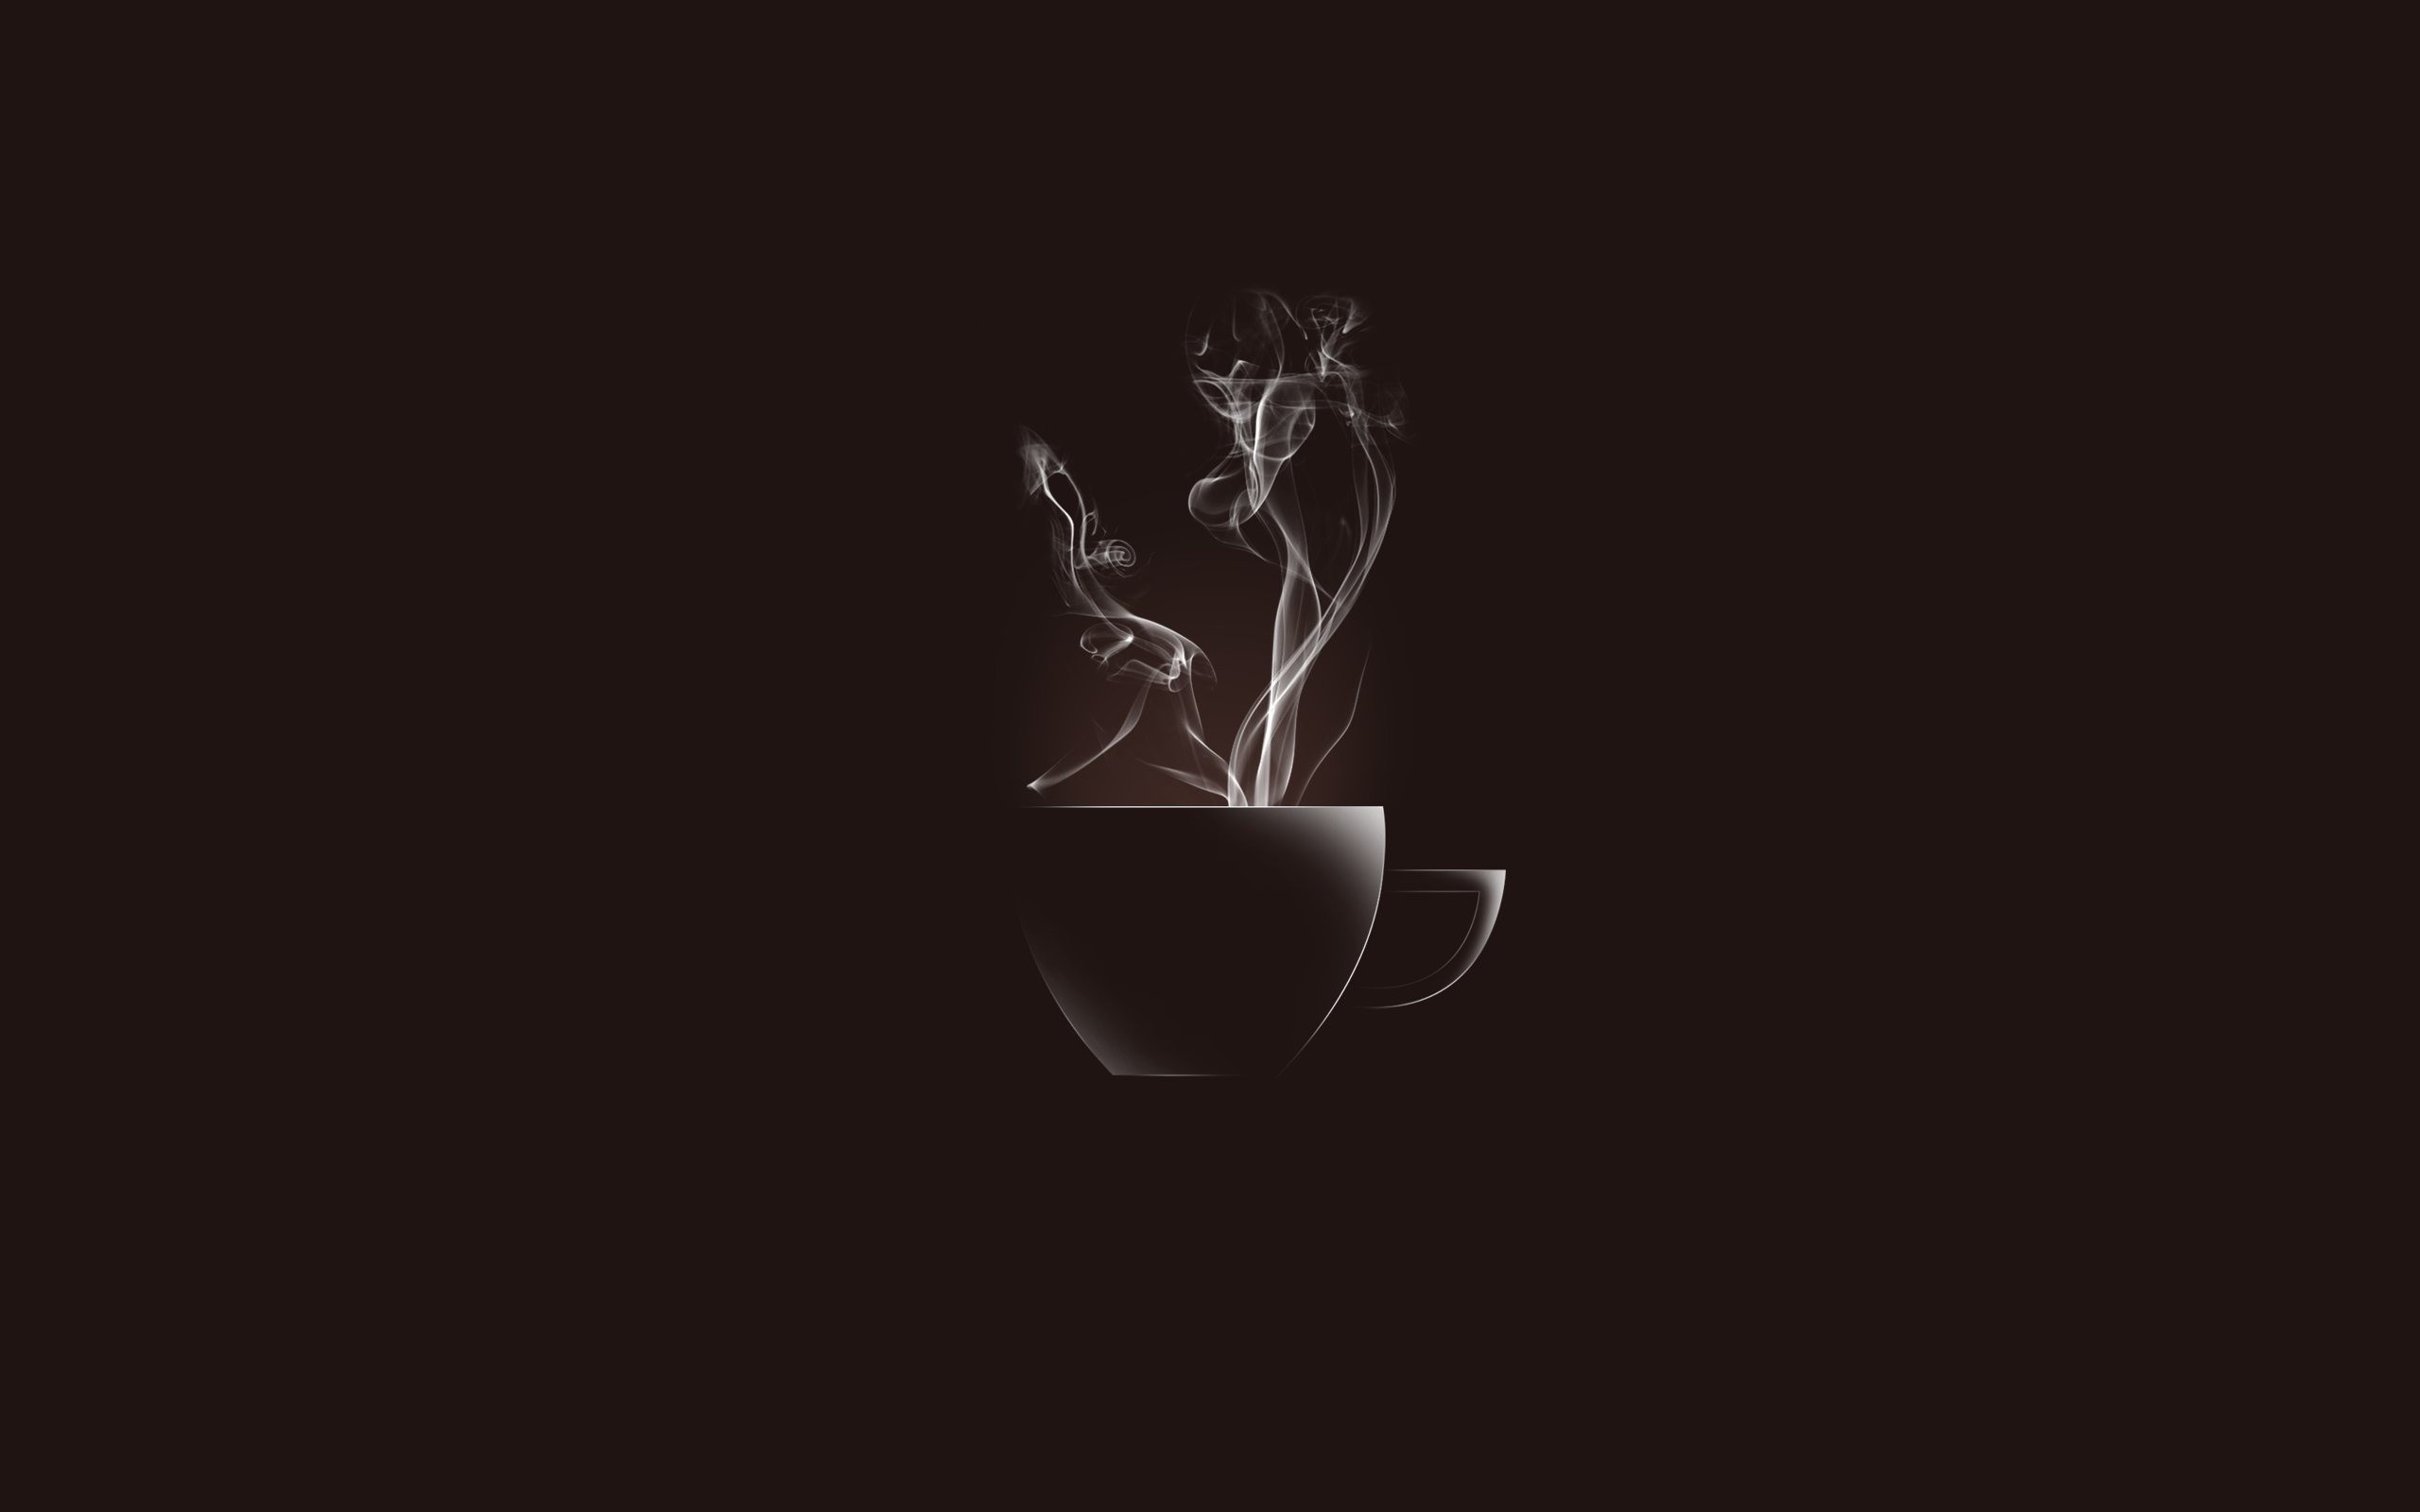  49 Coffee  Cup Wallpaper Backgrounds on WallpaperSafari